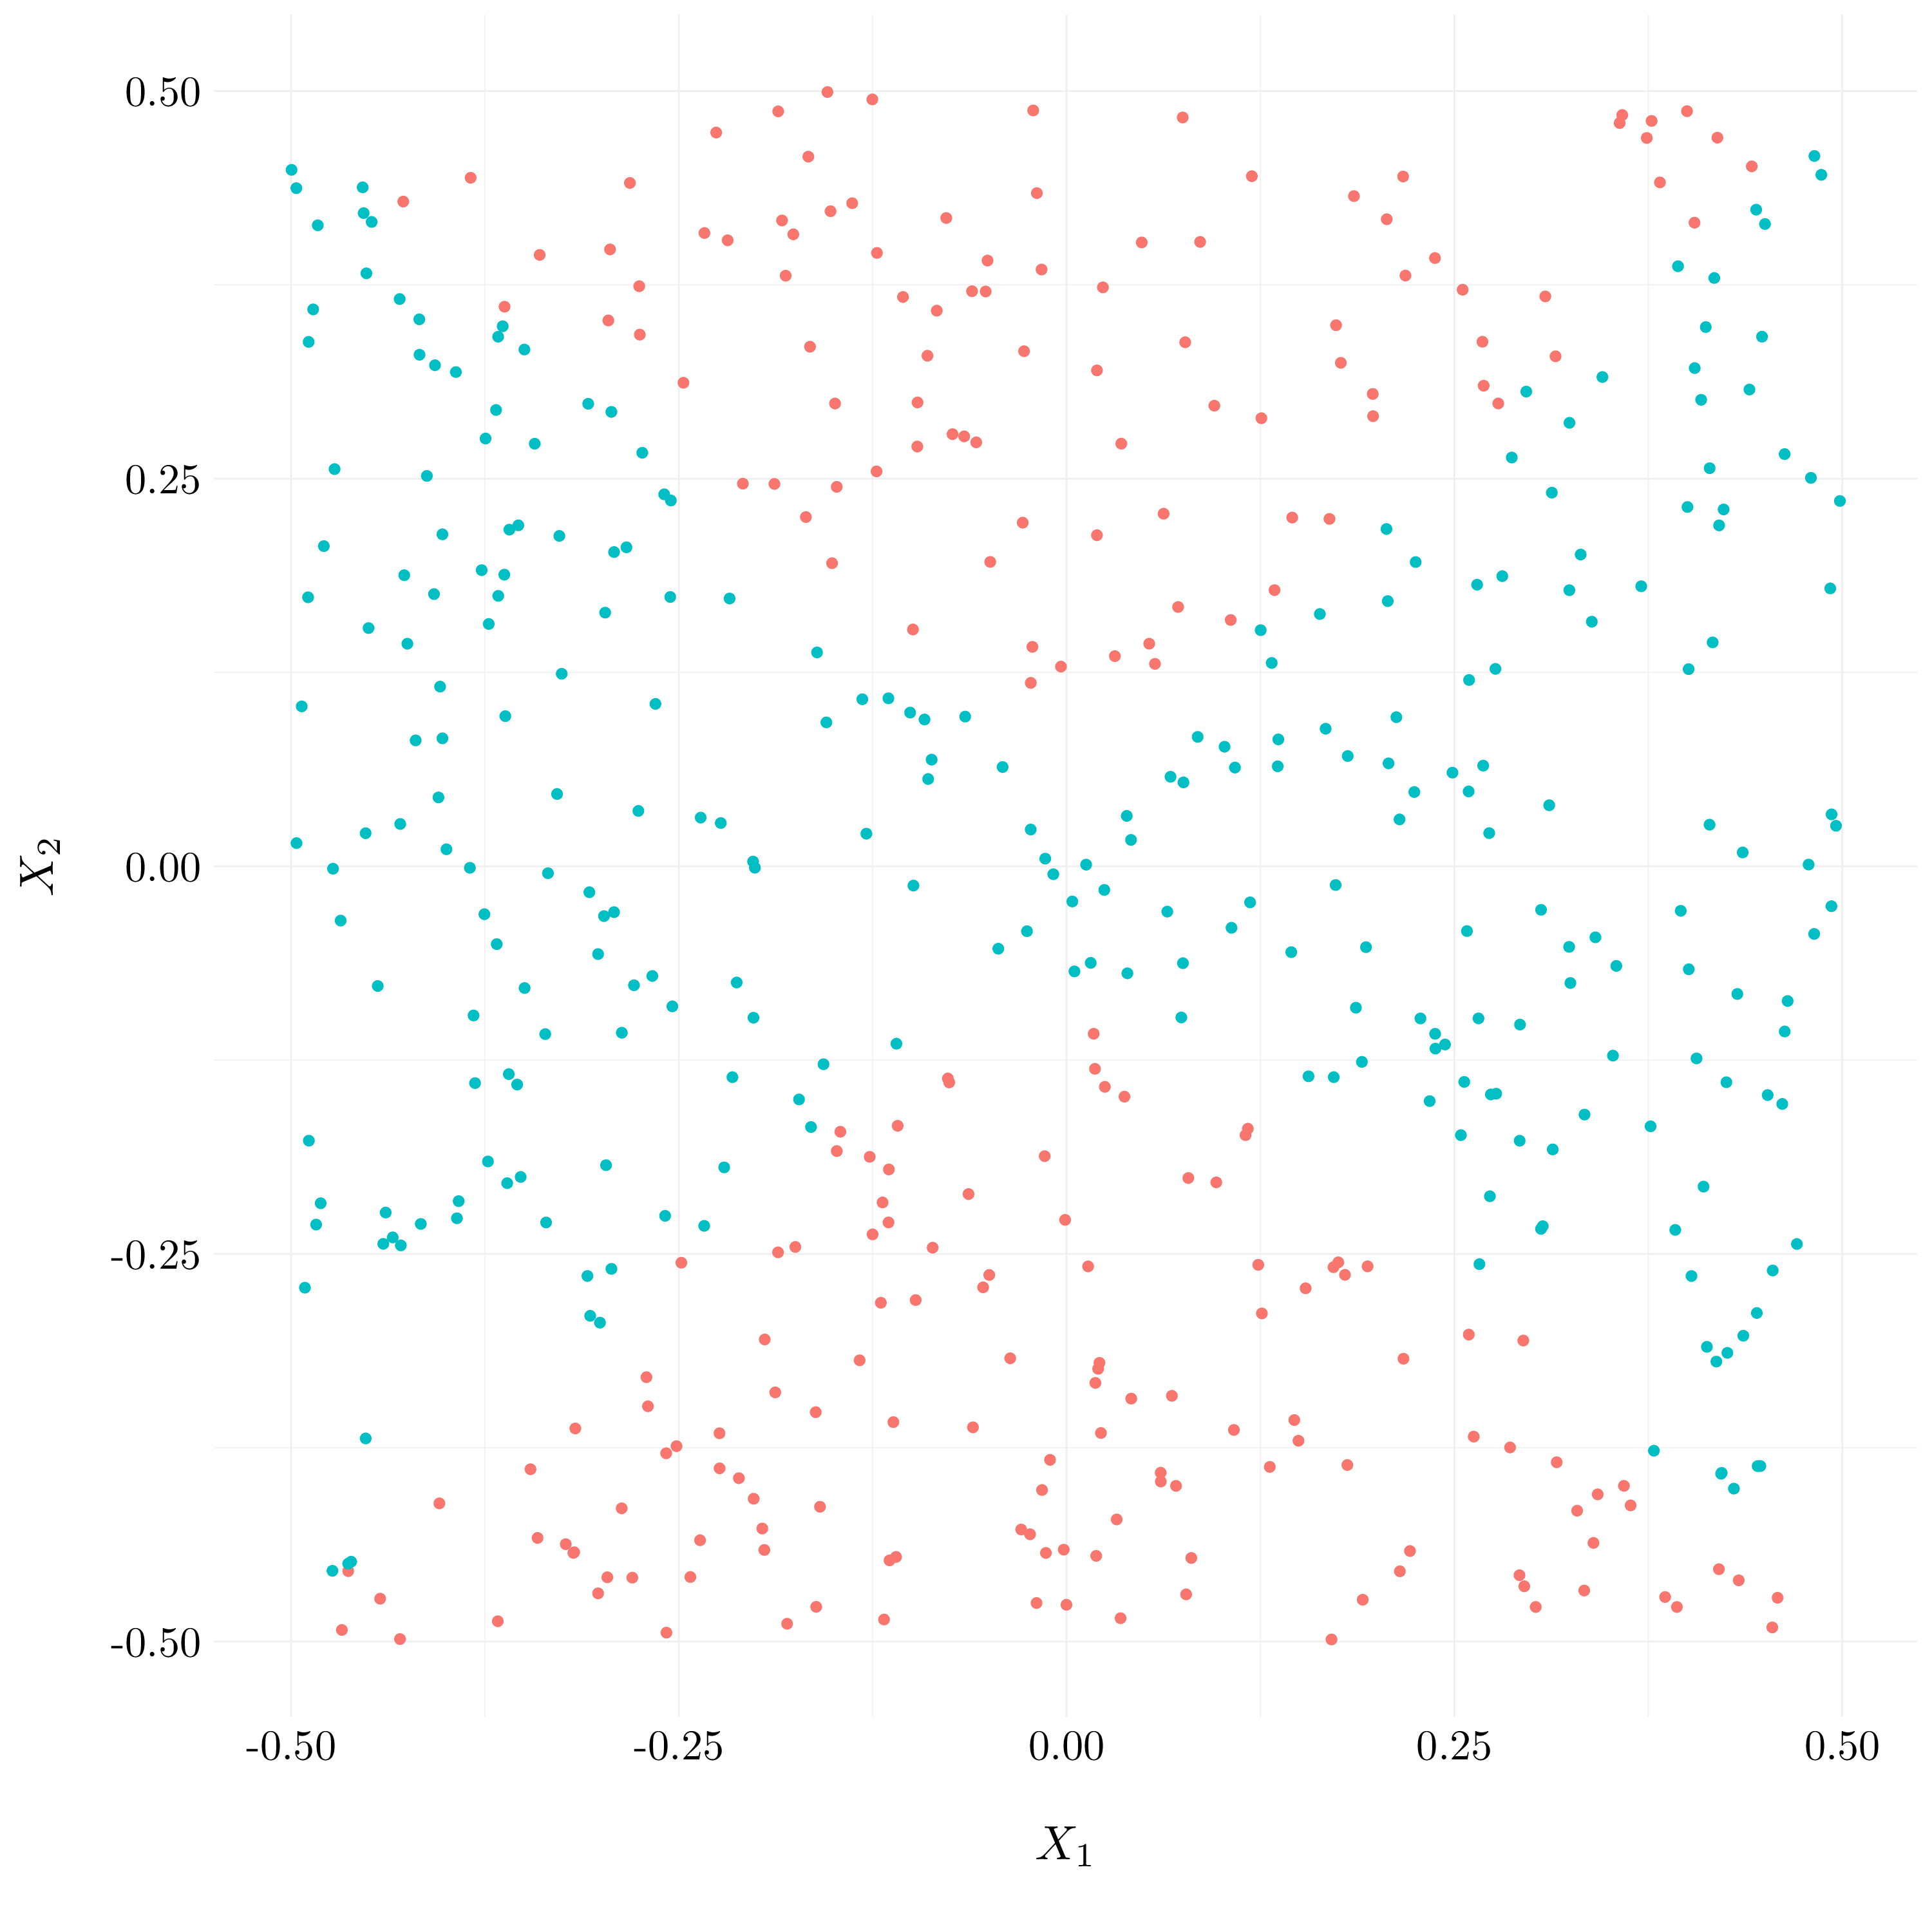 Plot of the observations with predicted classes for GLM model